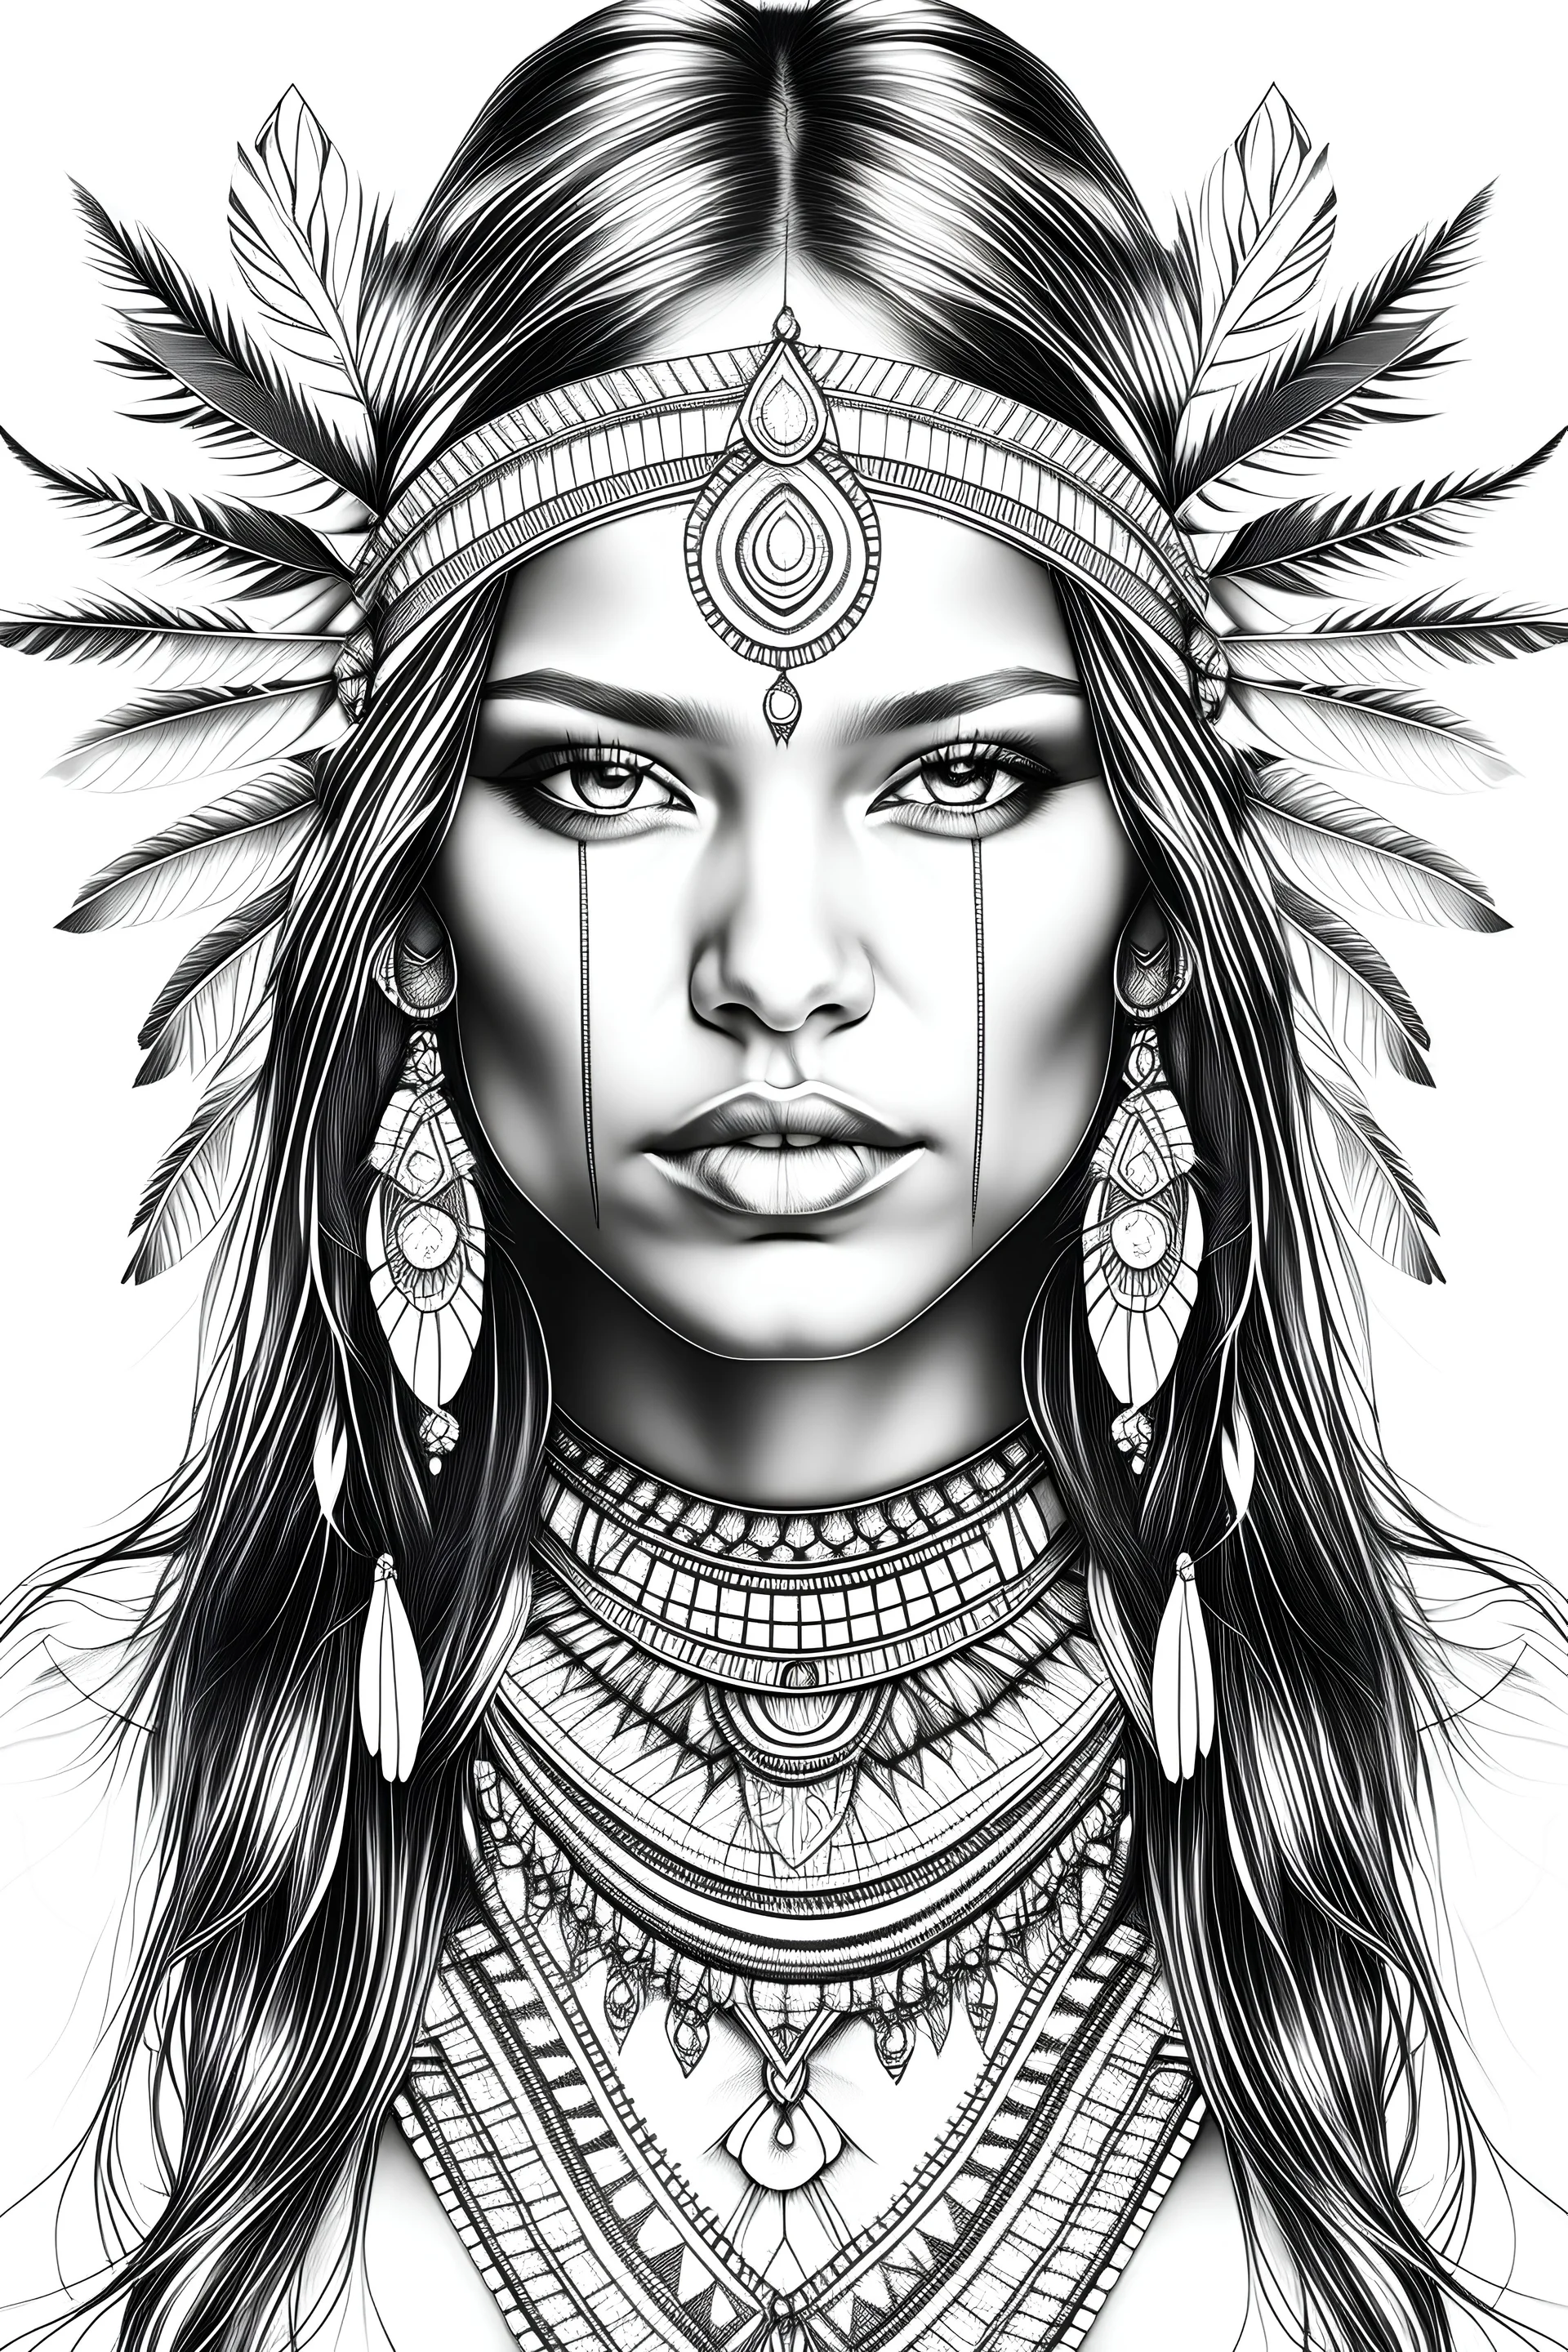 Pages with a beautiful native american woman's face, white background, Sketch style, only use an outline, Mandala style, clean line art, white background, no shadows, and clear and well outlined